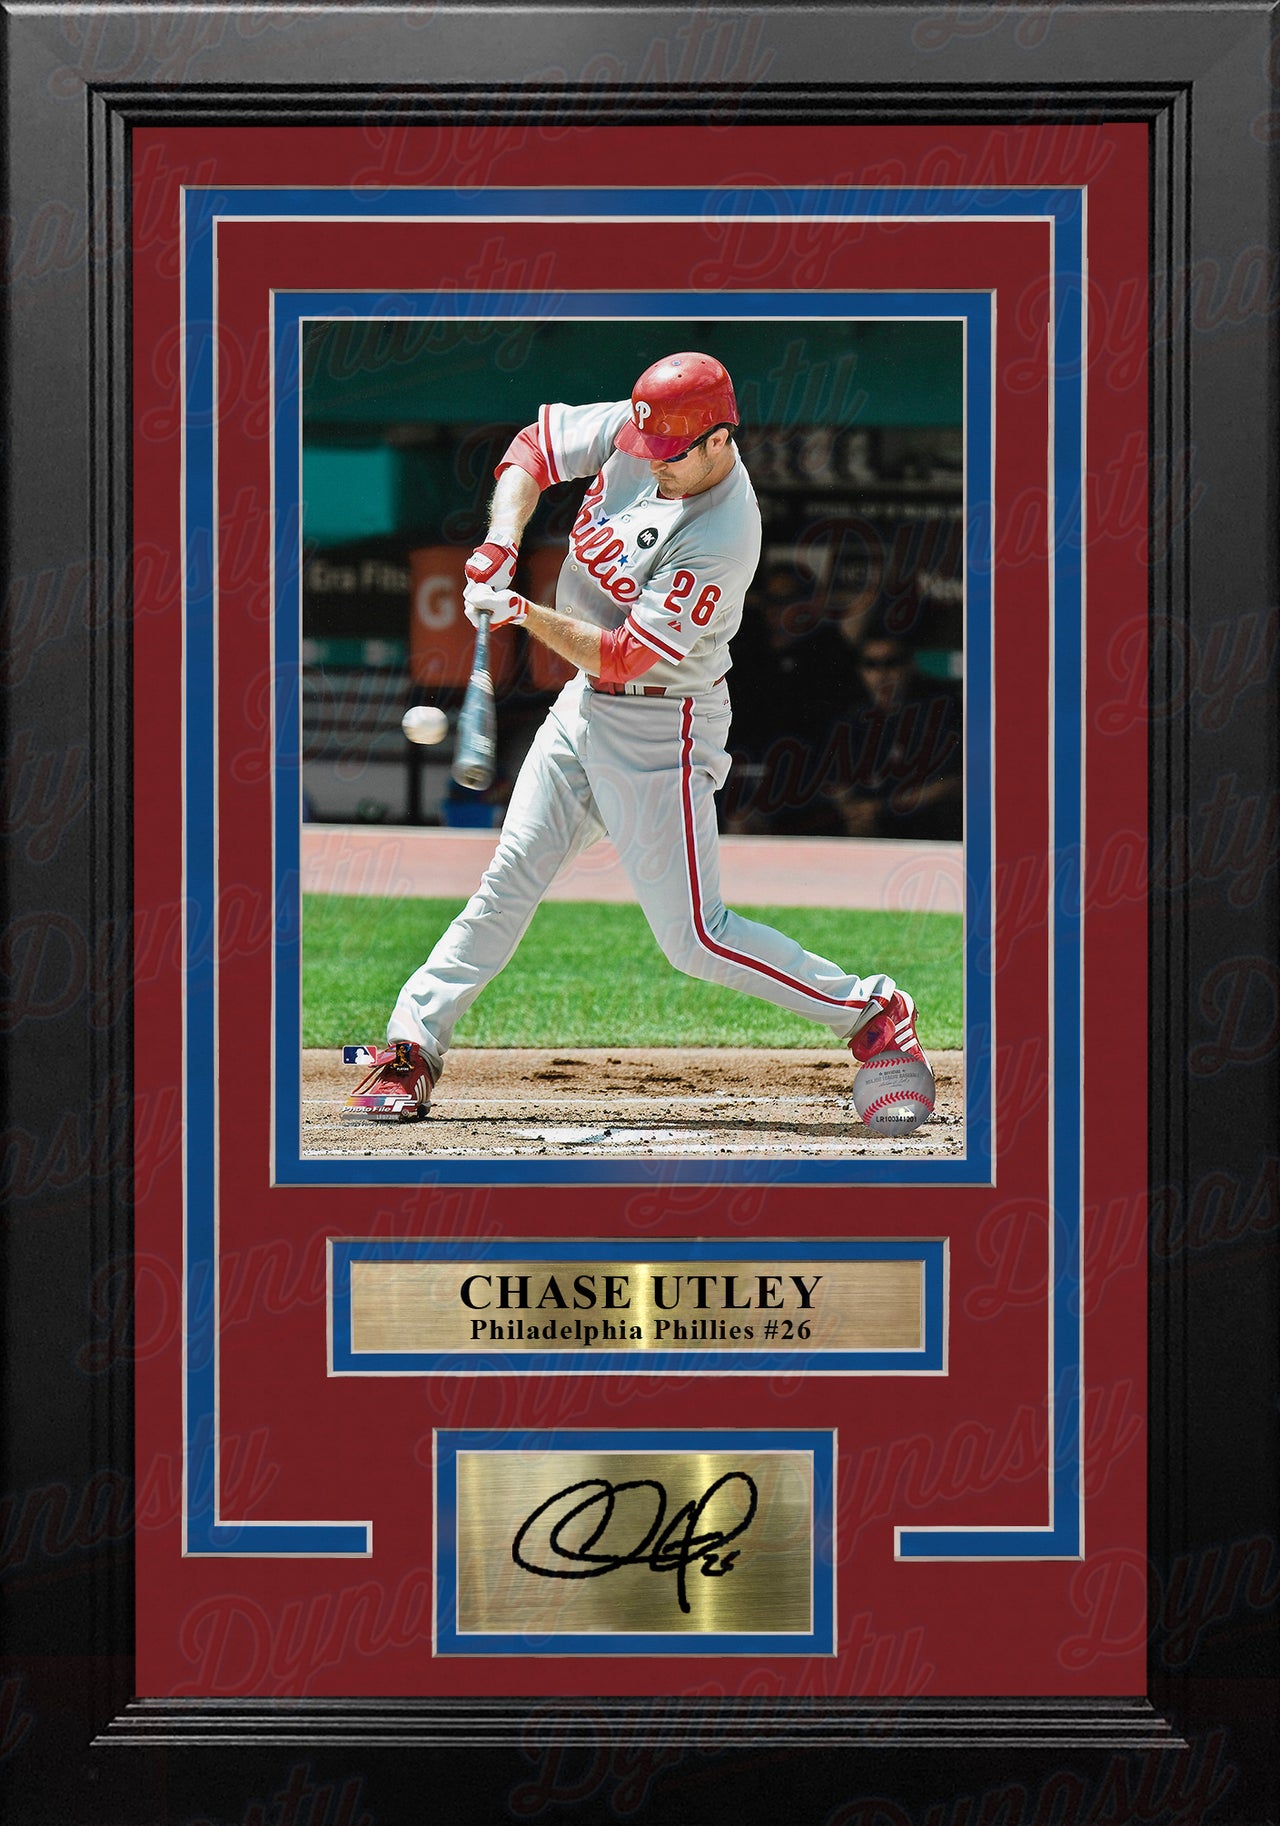 Chase Utley Swinging at the Plate Philadelphia Phillies 8x10 Framed Photo with Engraved Autograph - Dynasty Sports & Framing 